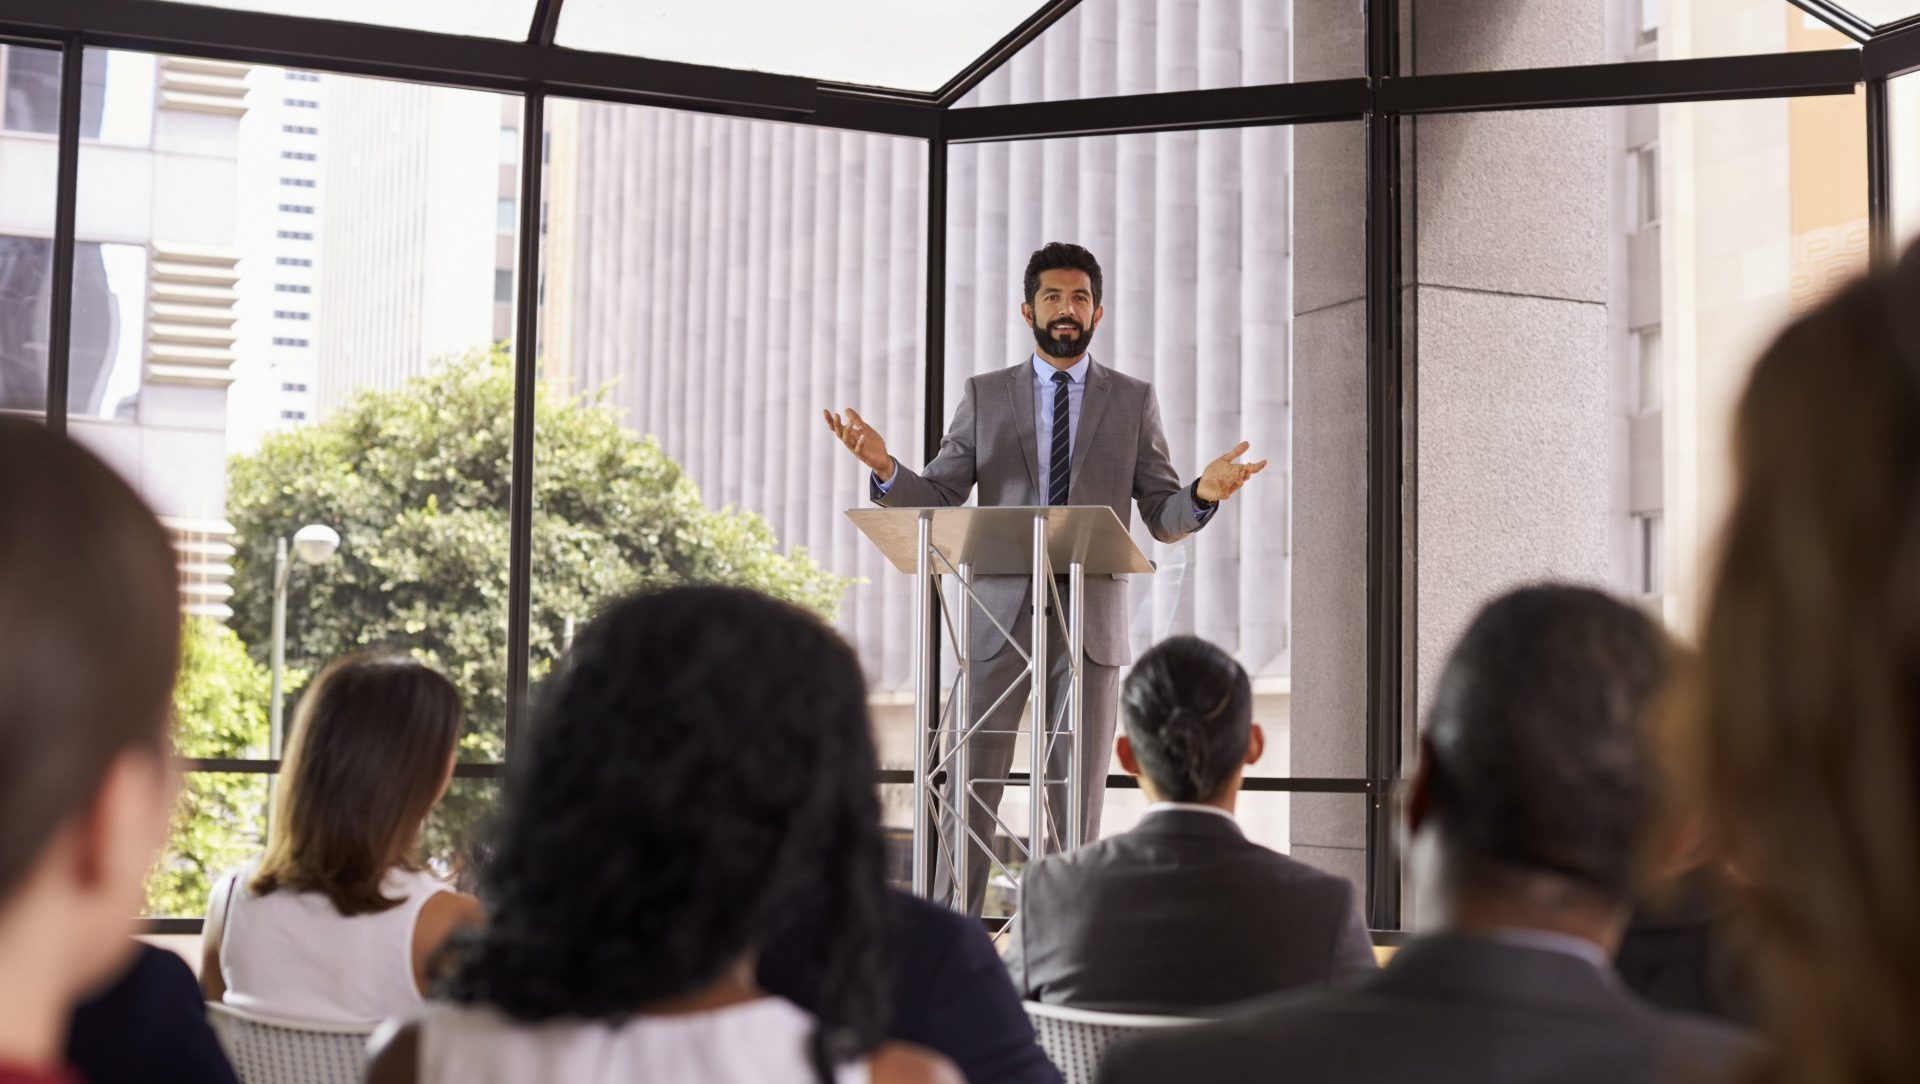 hispanic-man-gesturing-to-audience-at-business-PDUCYF9-min